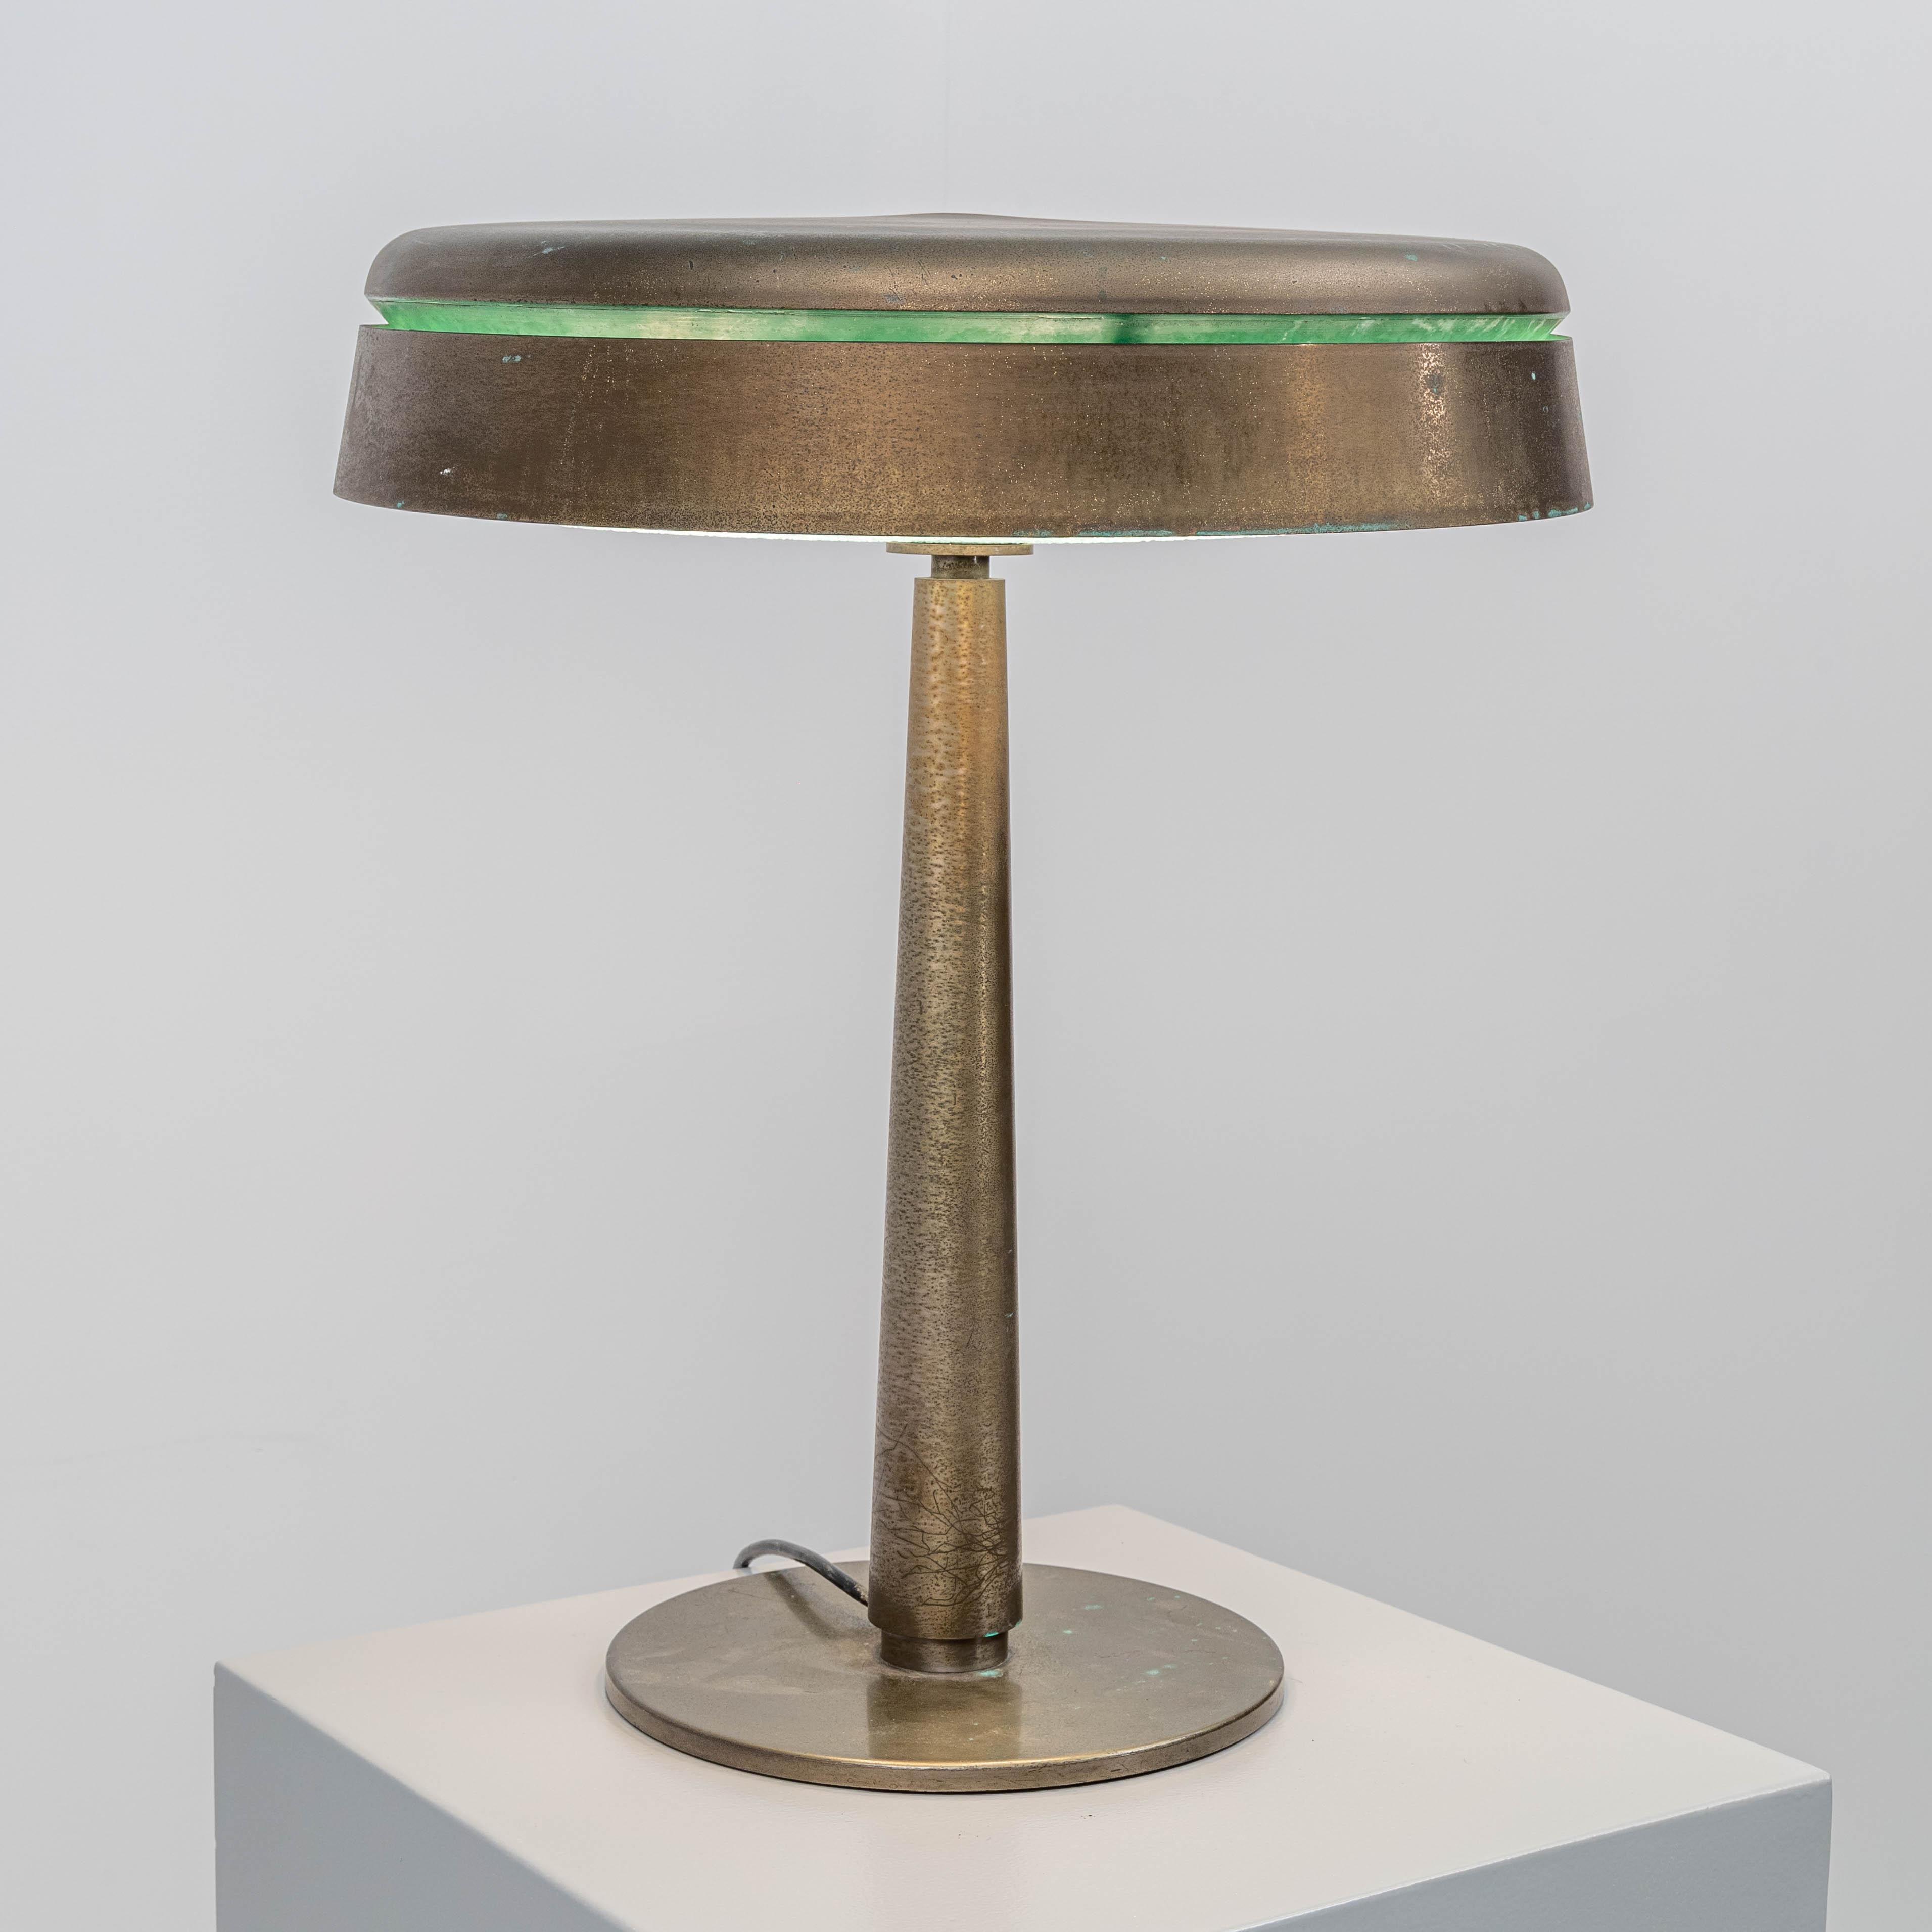 Max Ingrand Table Lamp #2278 for Fontana Arte, Italy, 1960 In Good Condition For Sale In Uithoorn, NL